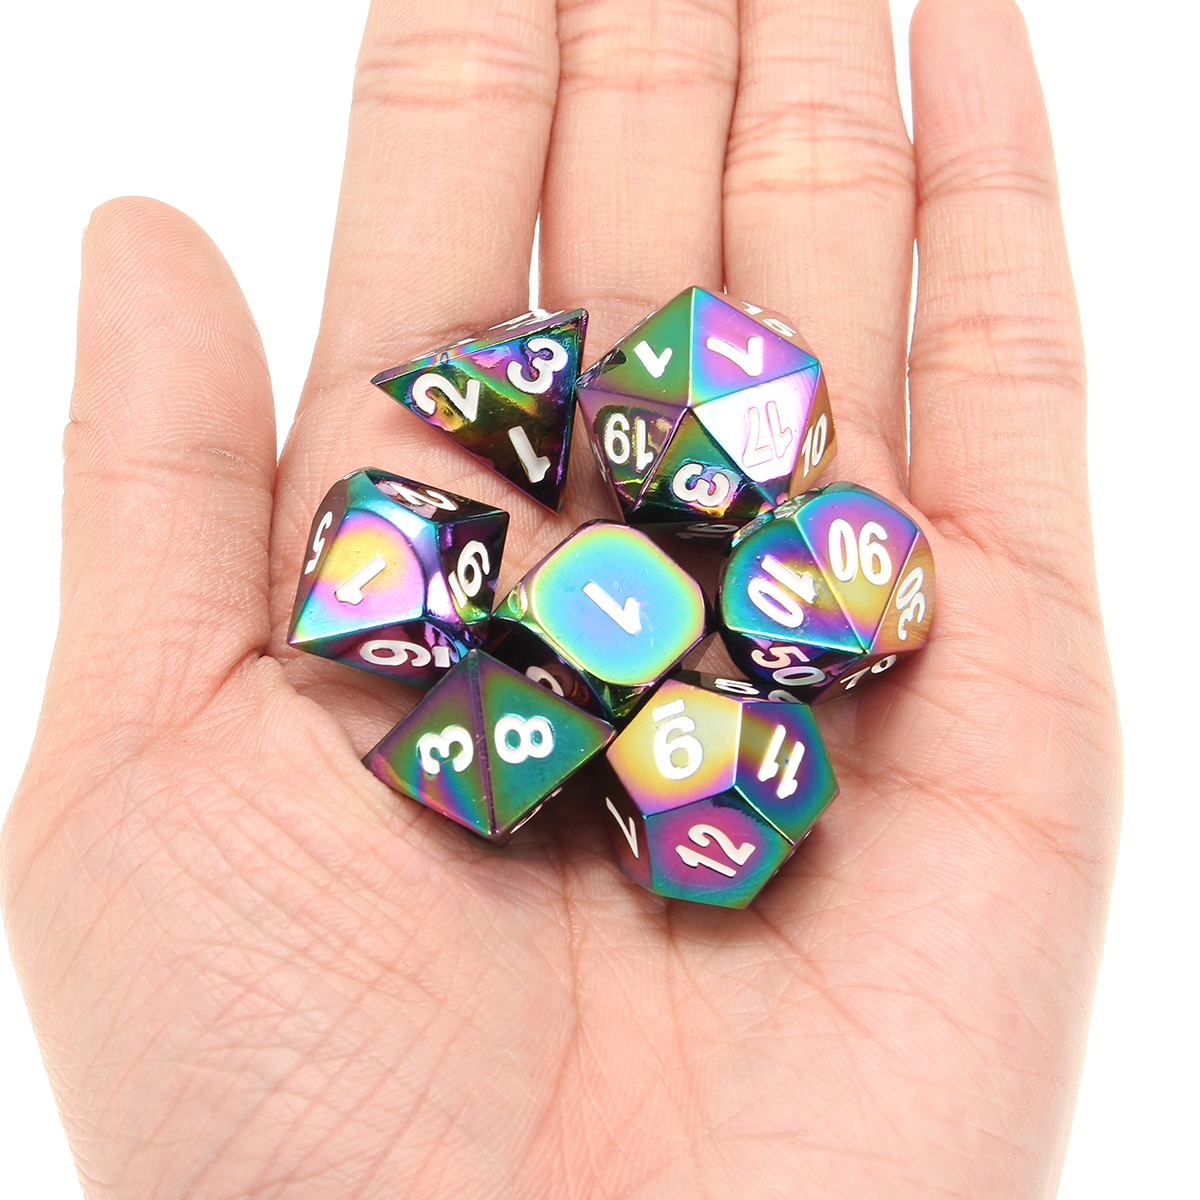 7Pcs-Colorful-Zinc-Alloy-Polyhedral-Dice-Set-Board-Game-Multisided-Dices-Gadget-1241484-5